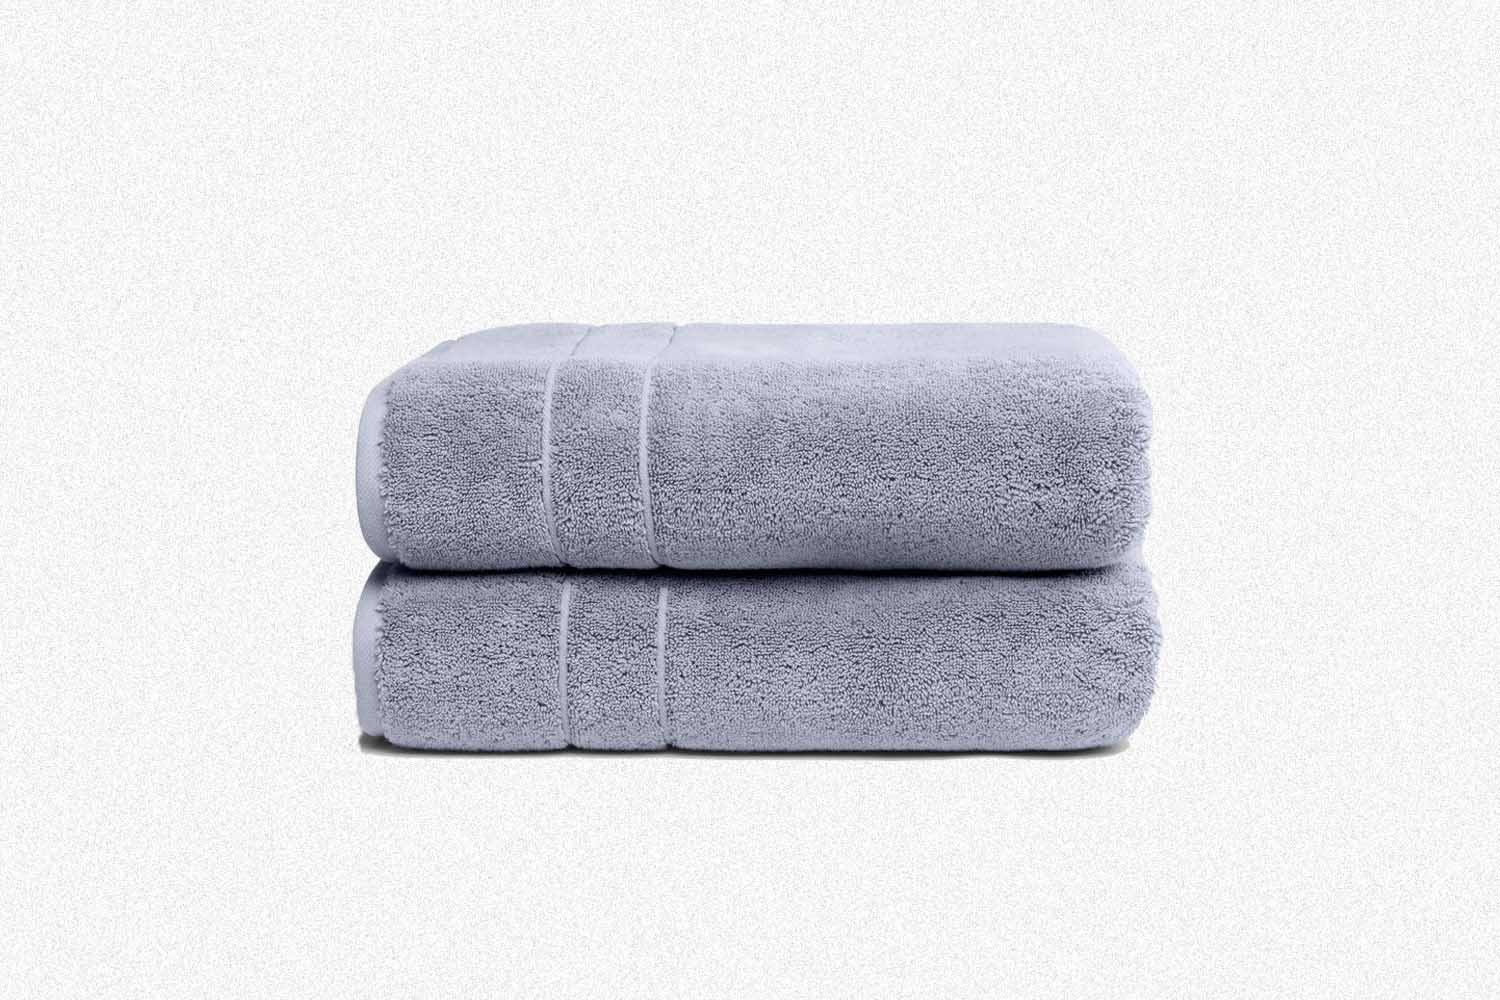 Brooklinen’s Best-Selling Super-Plush Bath Towels Are Finally Back in Stock